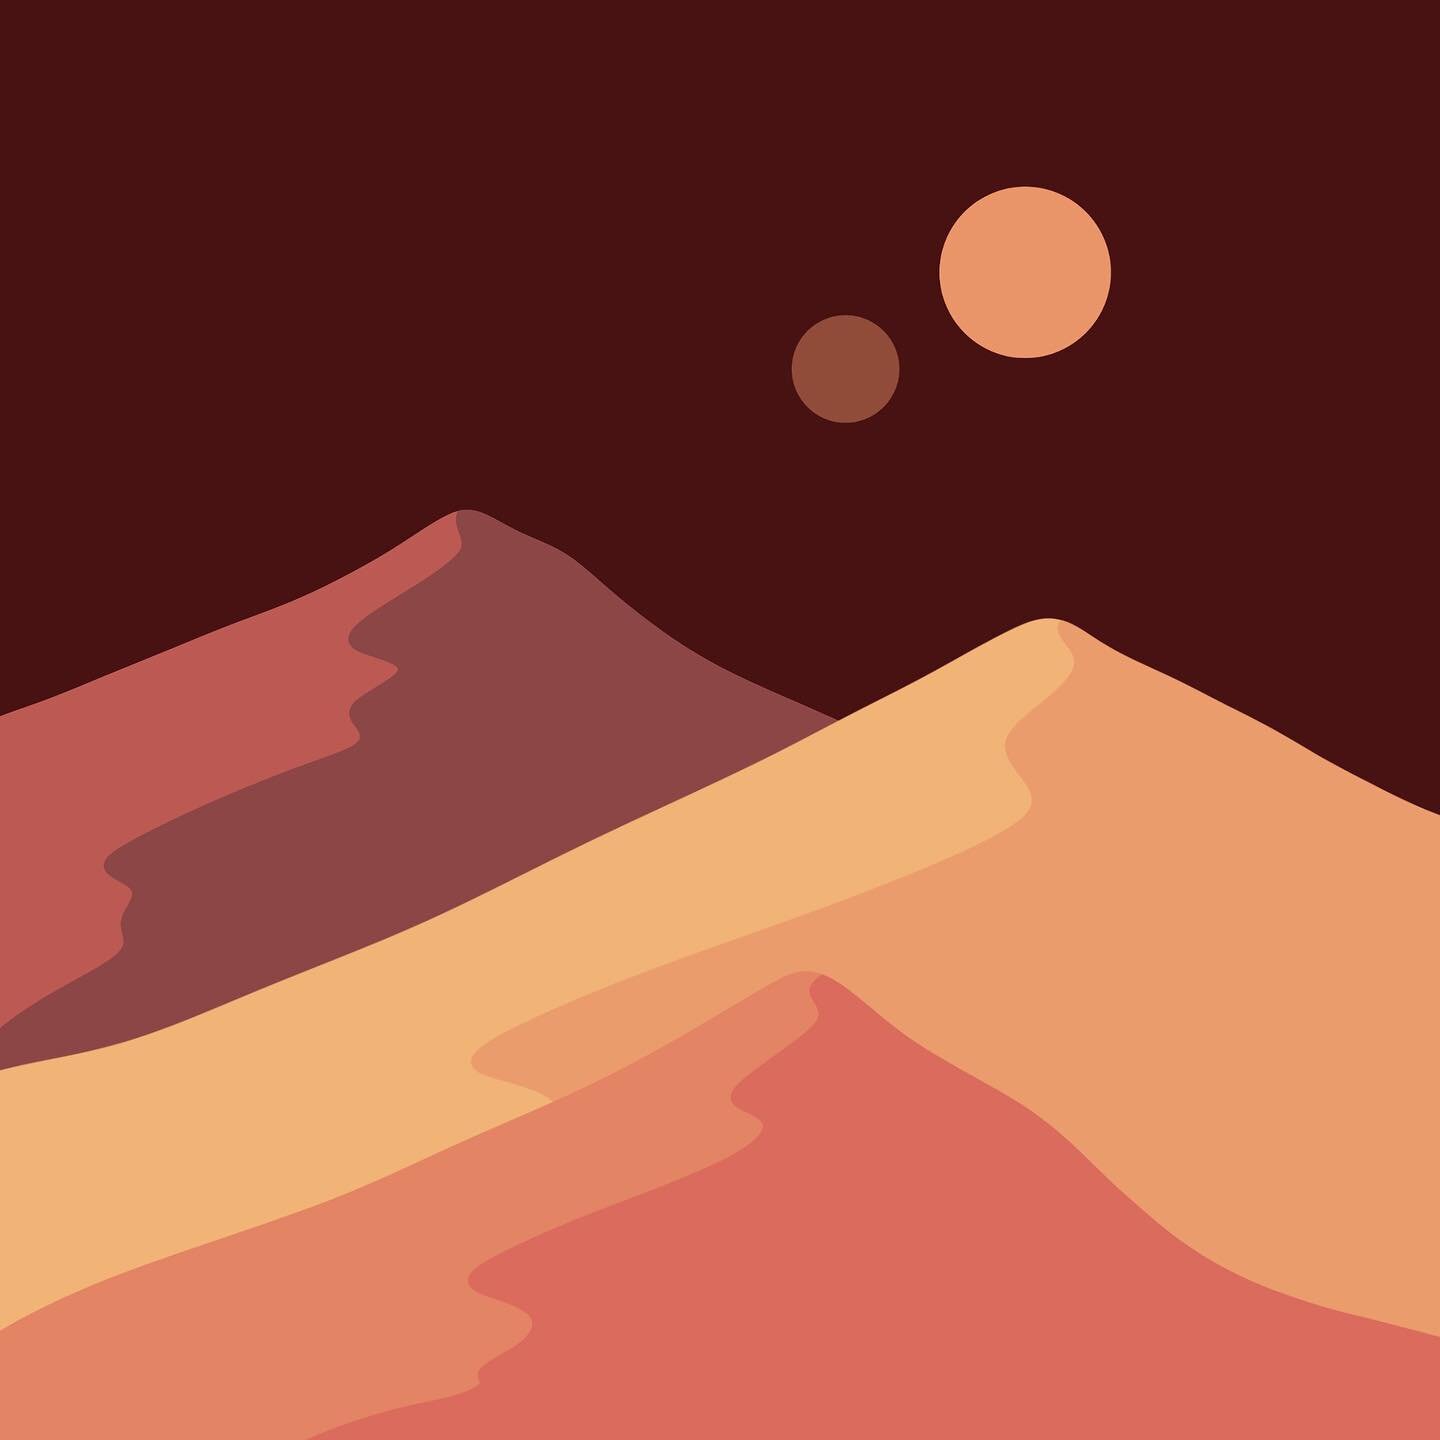 Simple lil mountains
.
I&rsquo;ve gotten out of the habit of my usual posting schedule and it&rsquo;s hard to get back into it. I&rsquo;m also fighting myself to post images and not just reels 😅